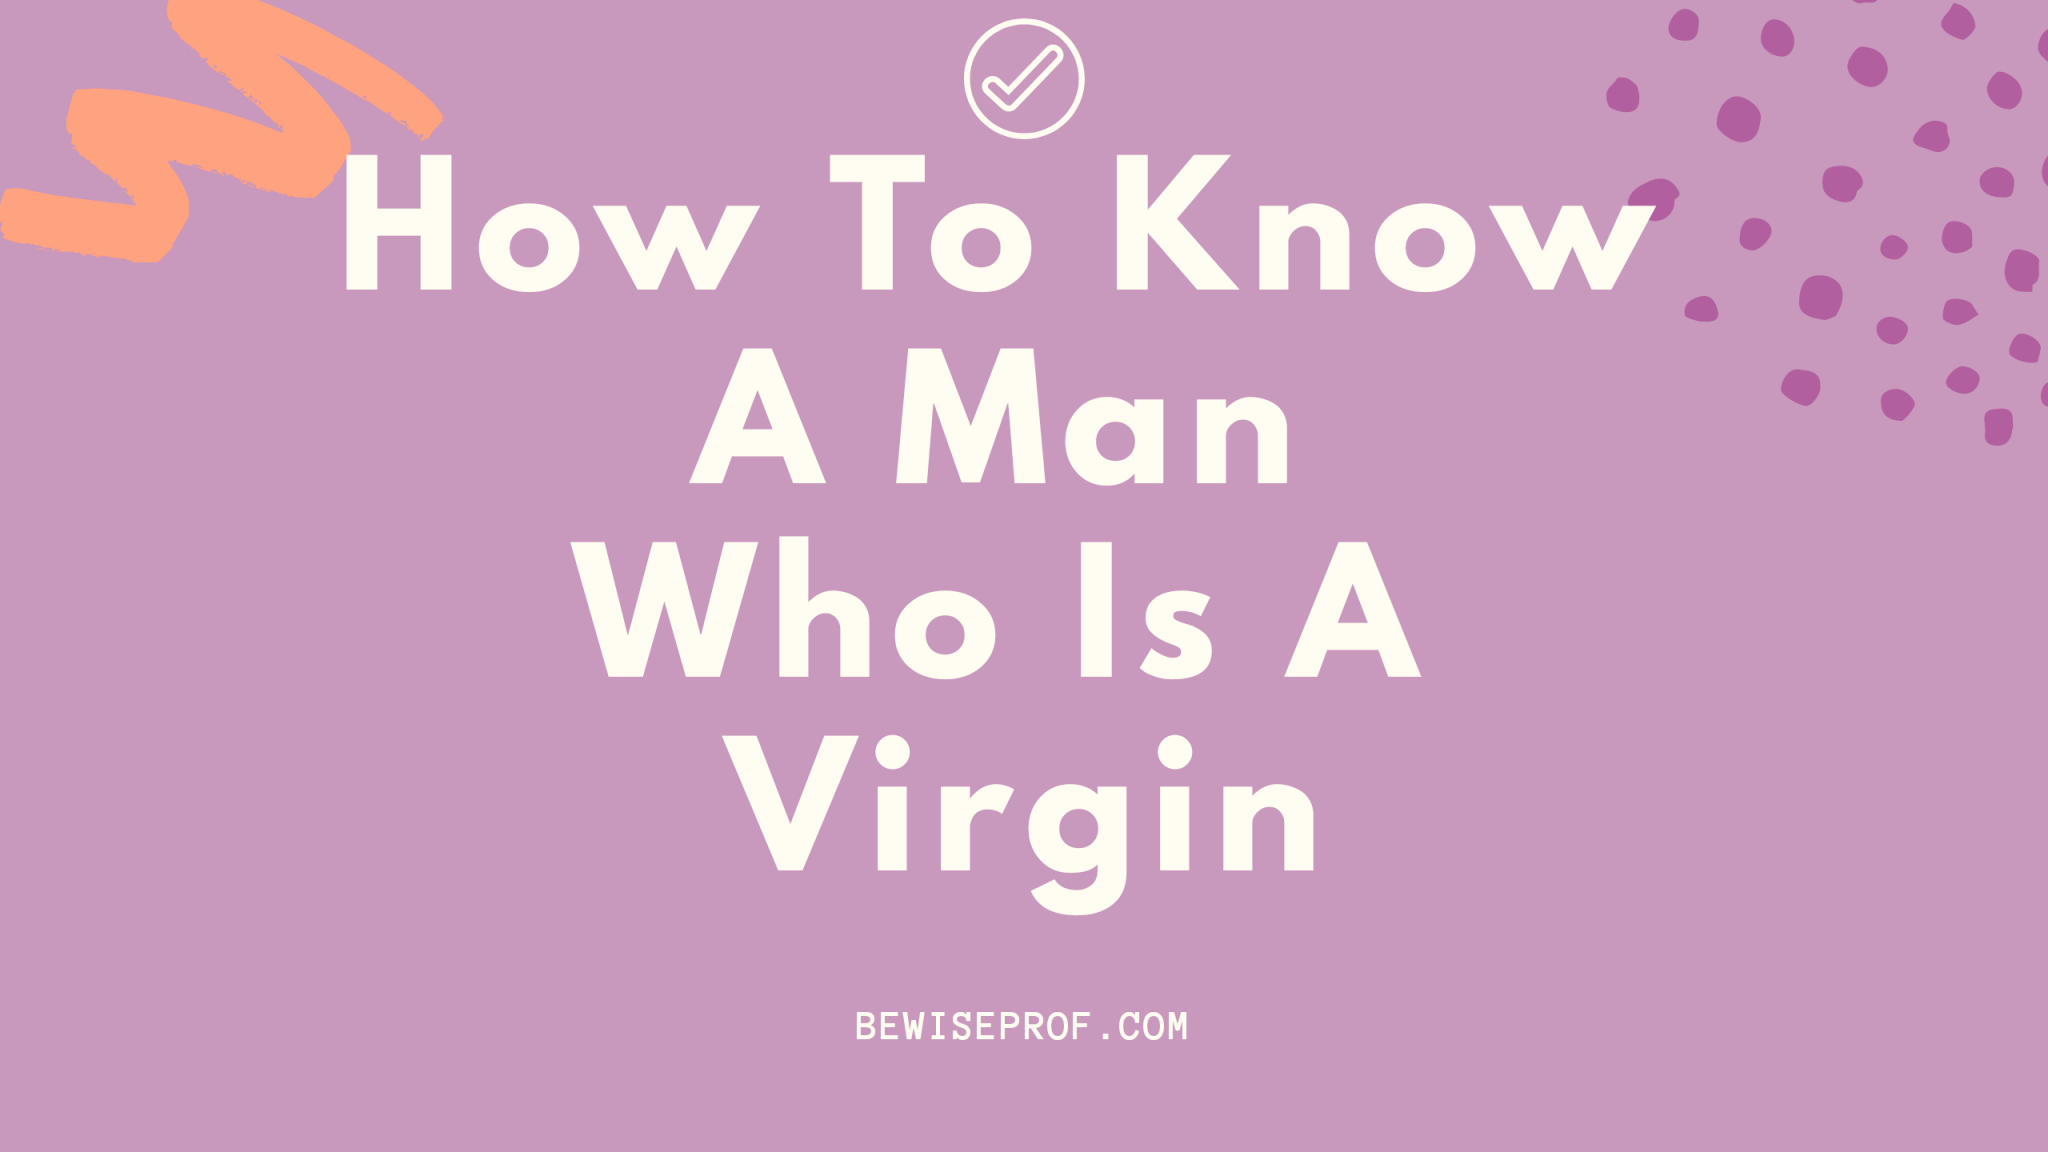 How To Know A Man Who Is A Virgin